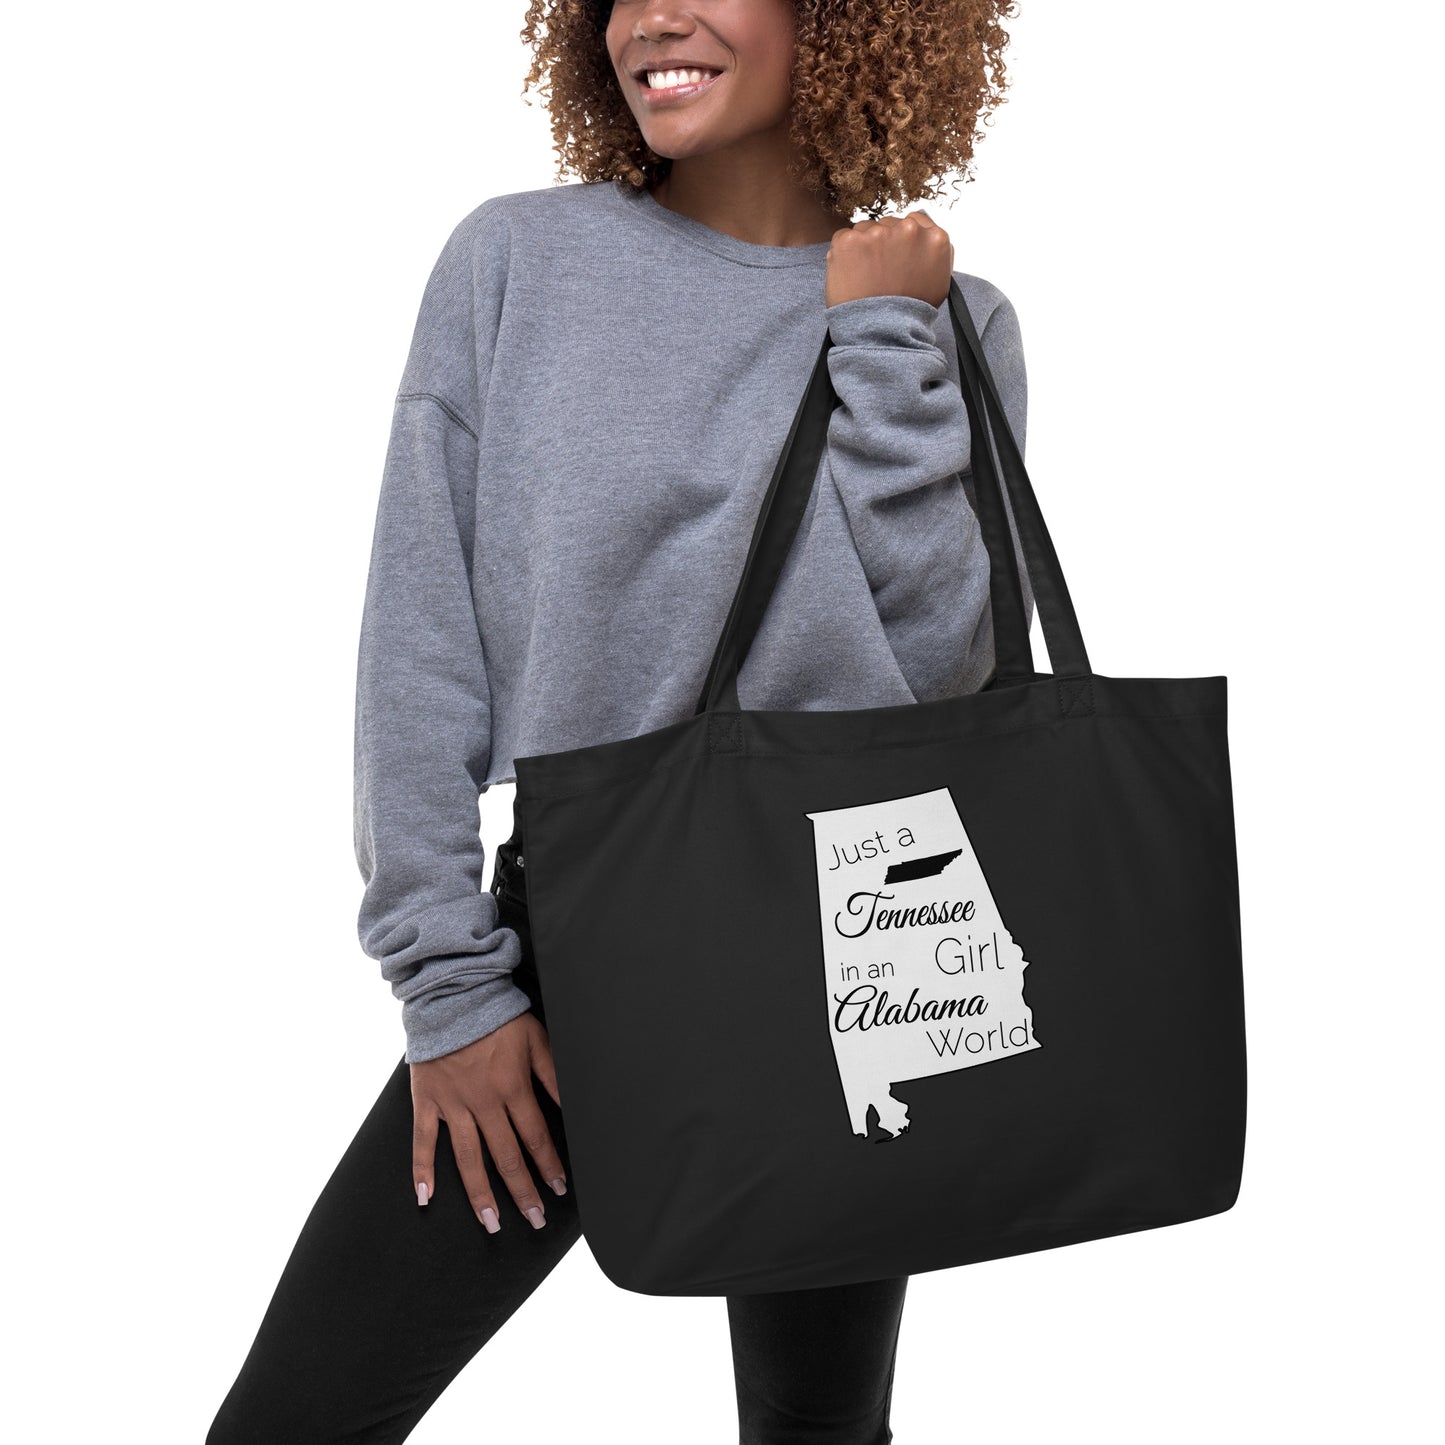 Just a Tennessee Girl in an Alabama World Large organic tote bag